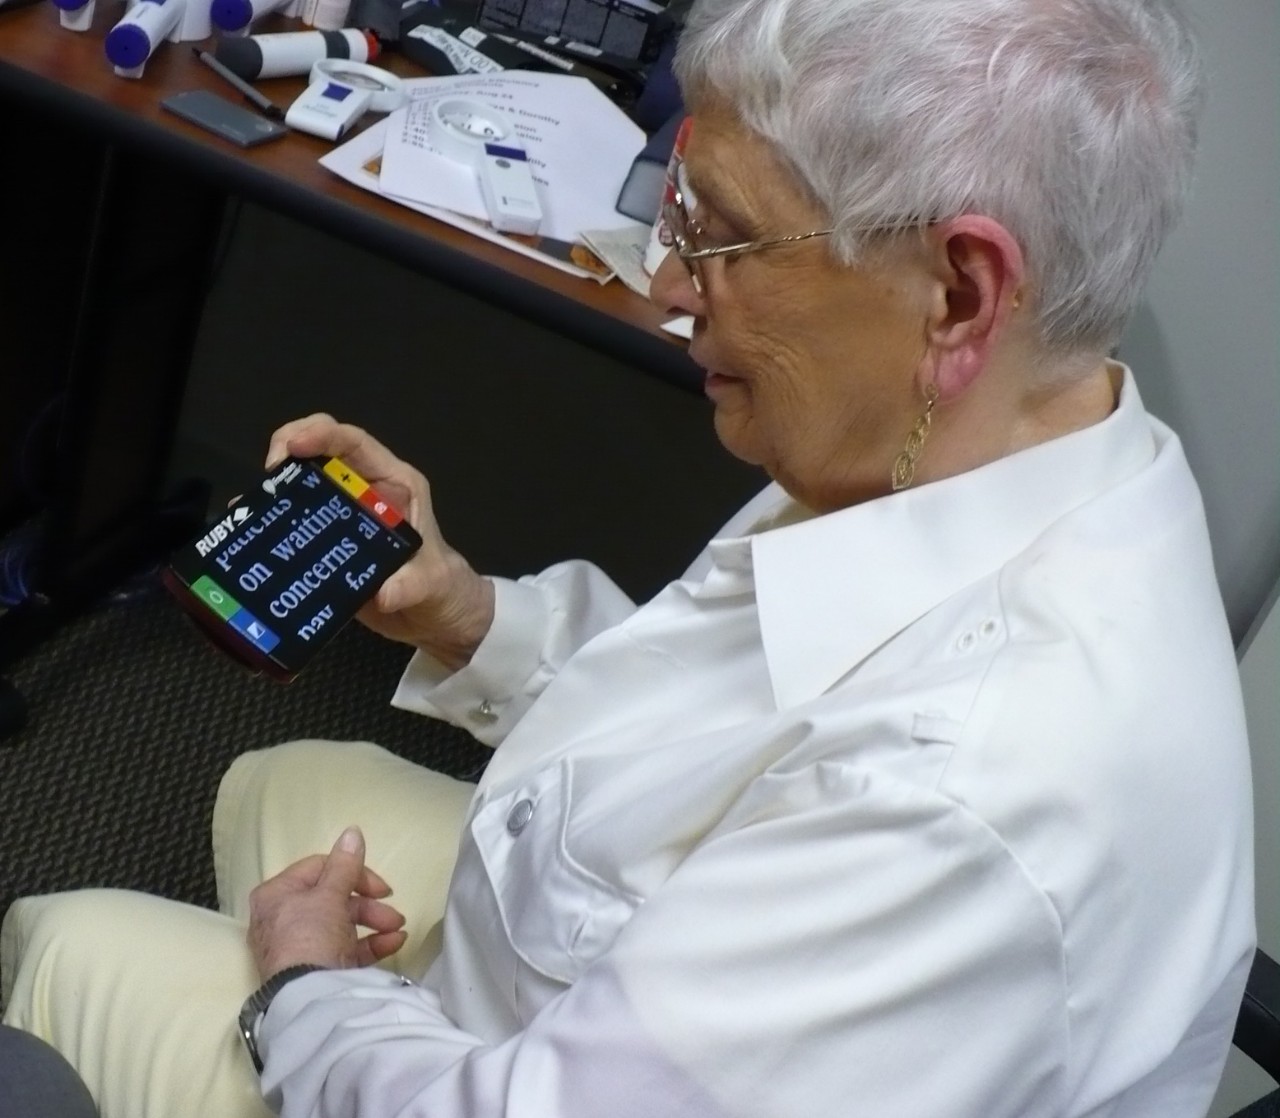 An older woman looking at a handheld device that magnifies text